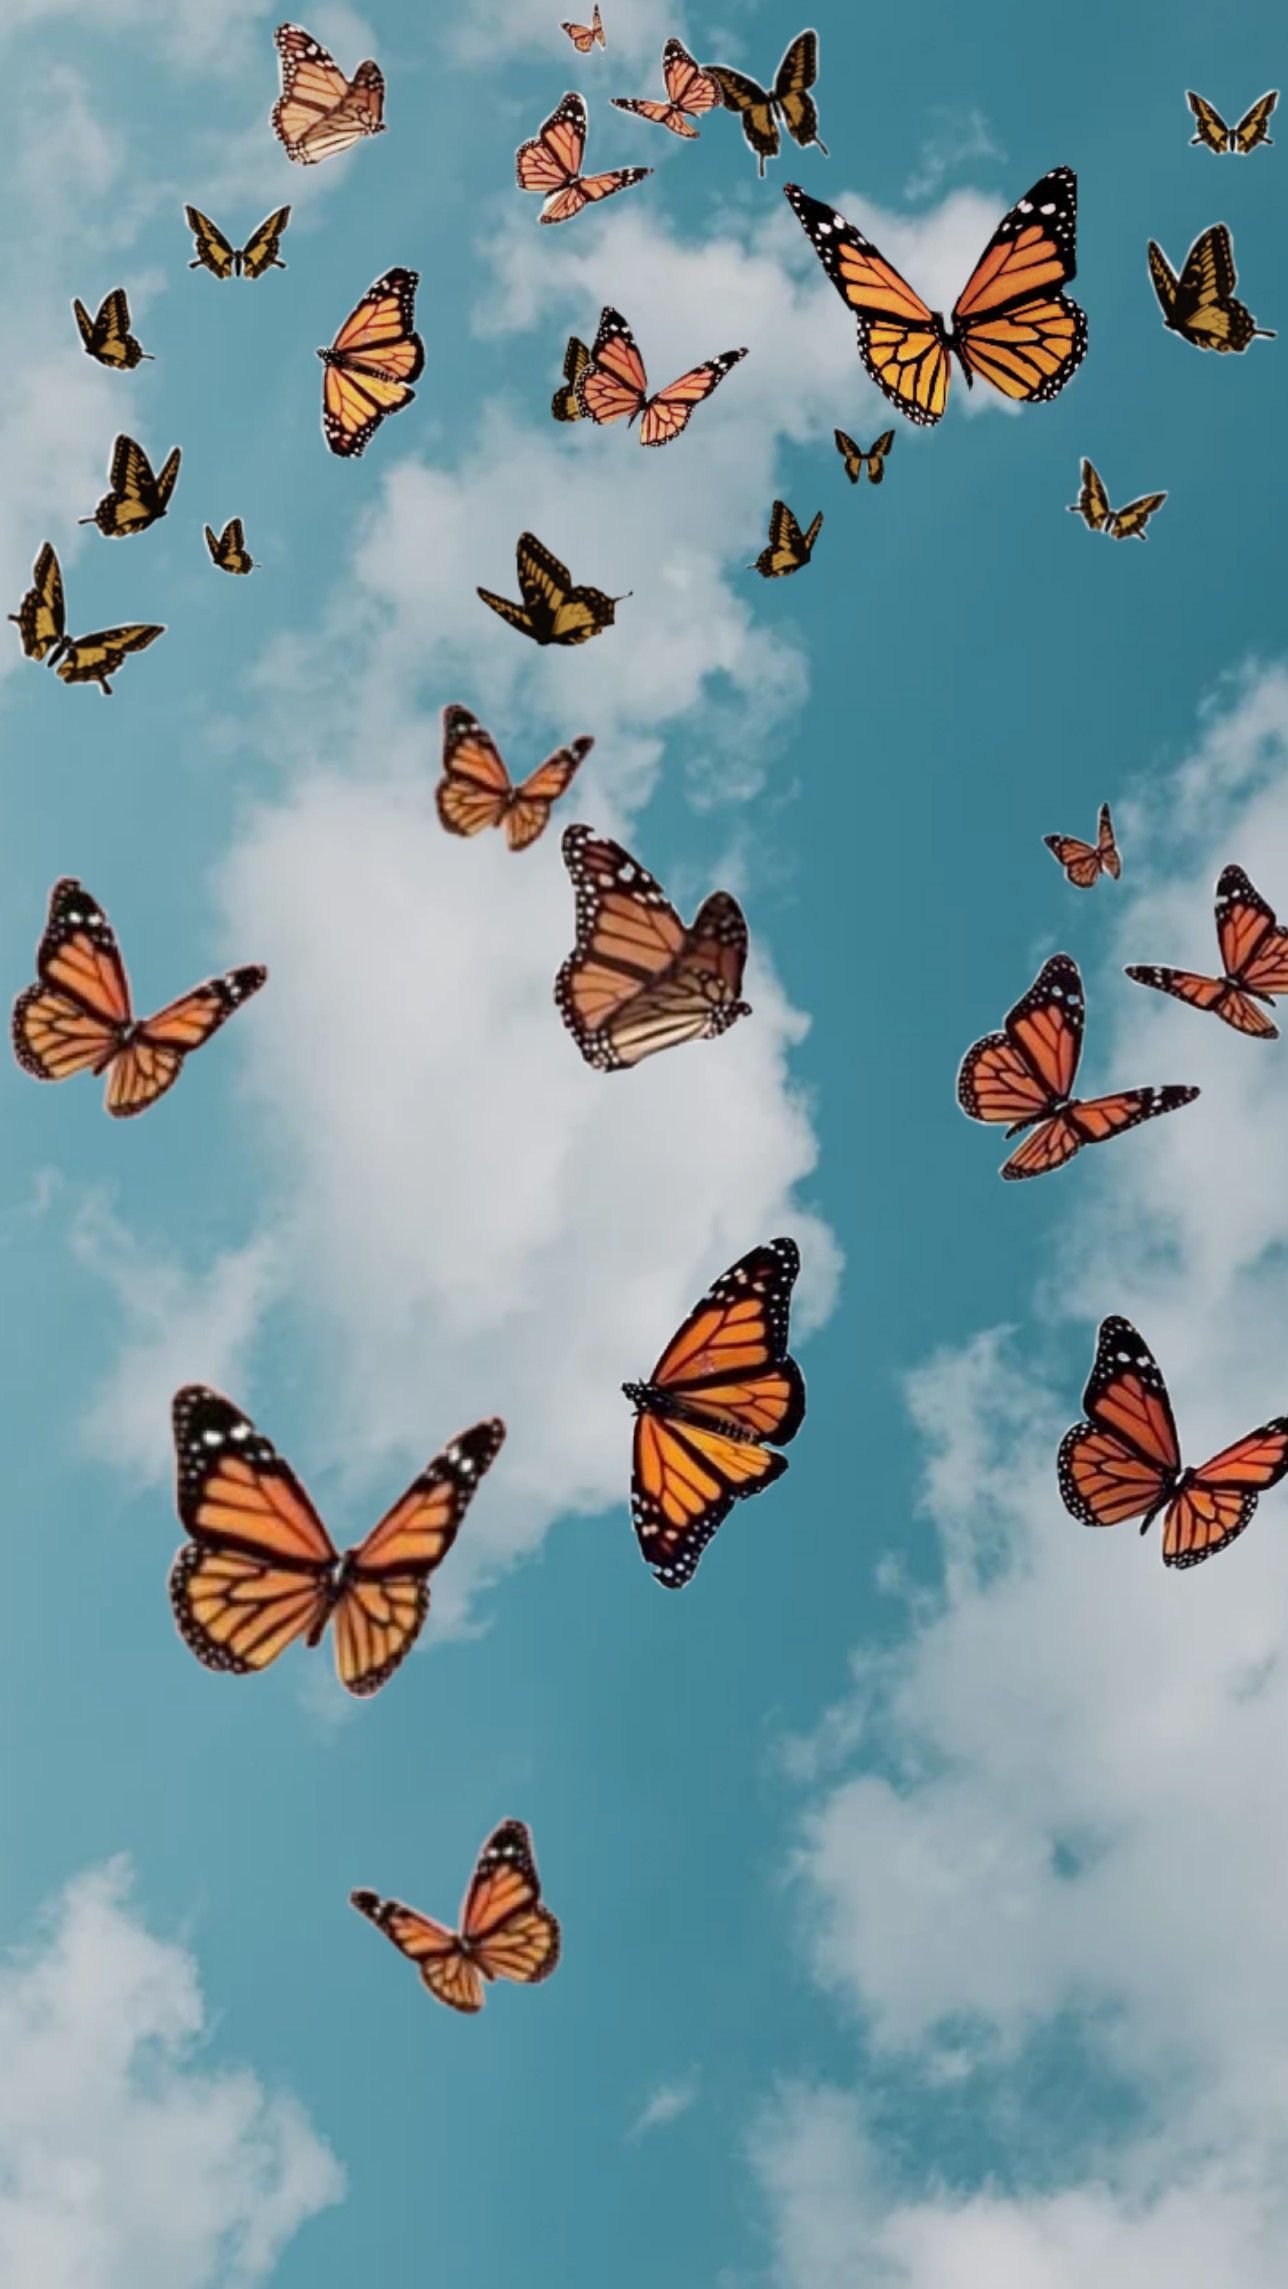 15 Selected pretty butterfly wallpaper aesthetic You Can Get It For ...